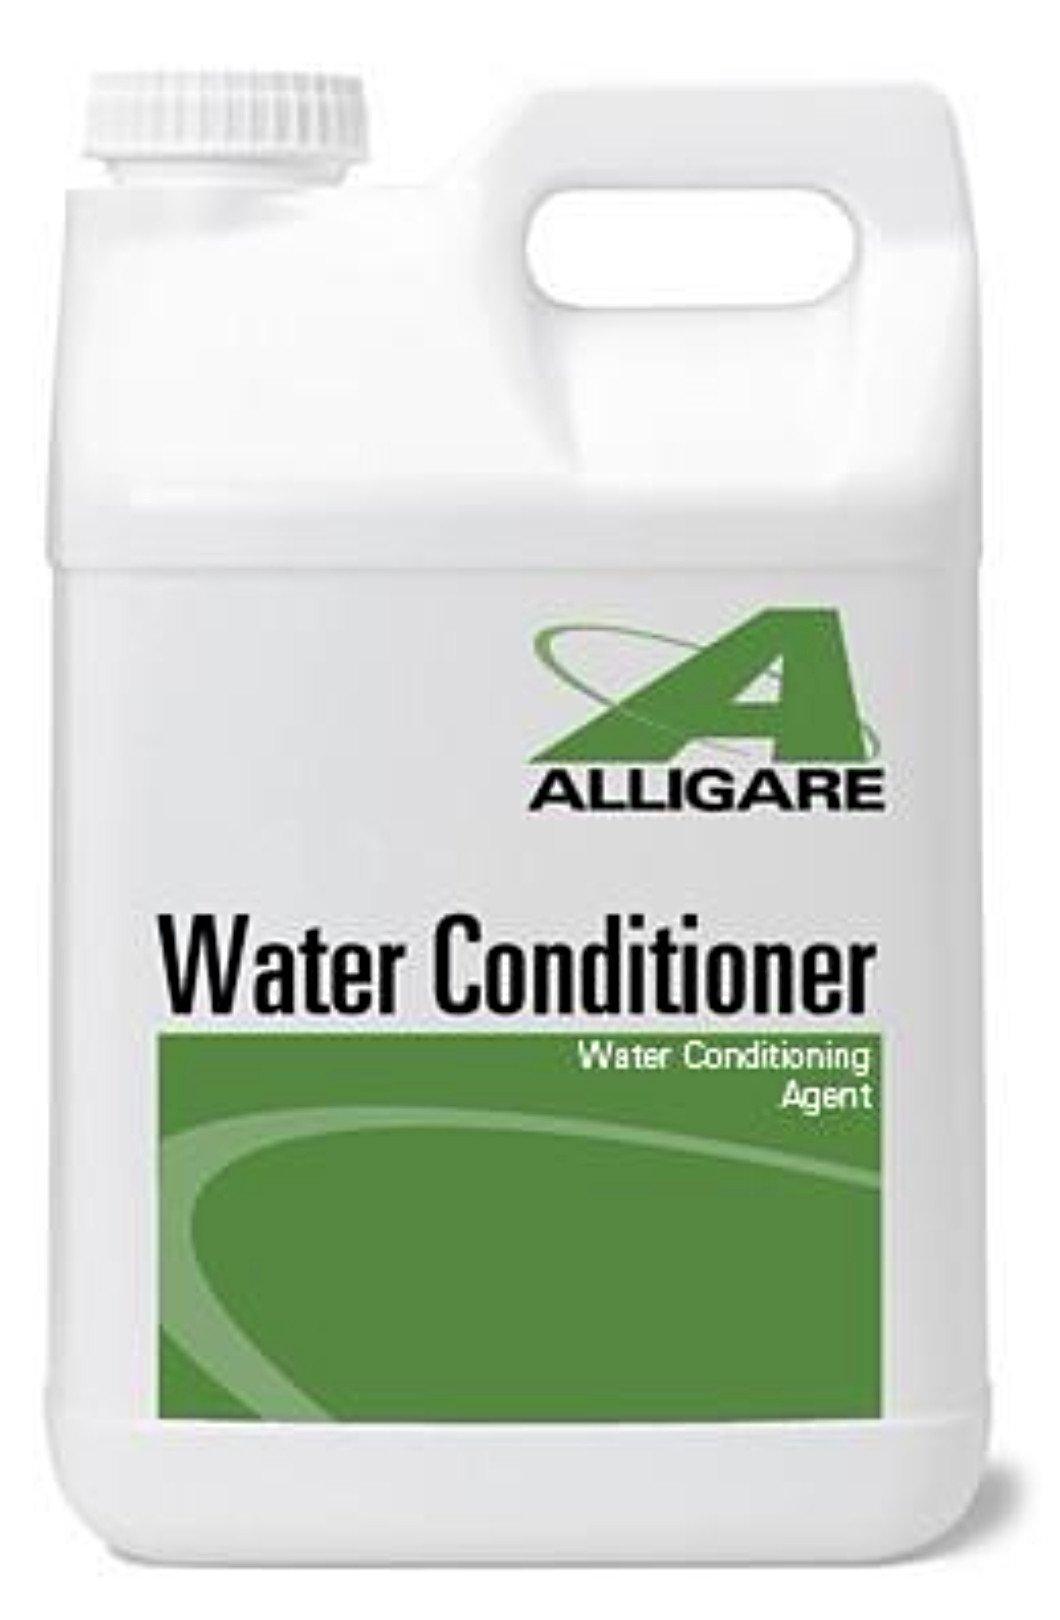 Surfactant - Water Conditioner For Pesticides